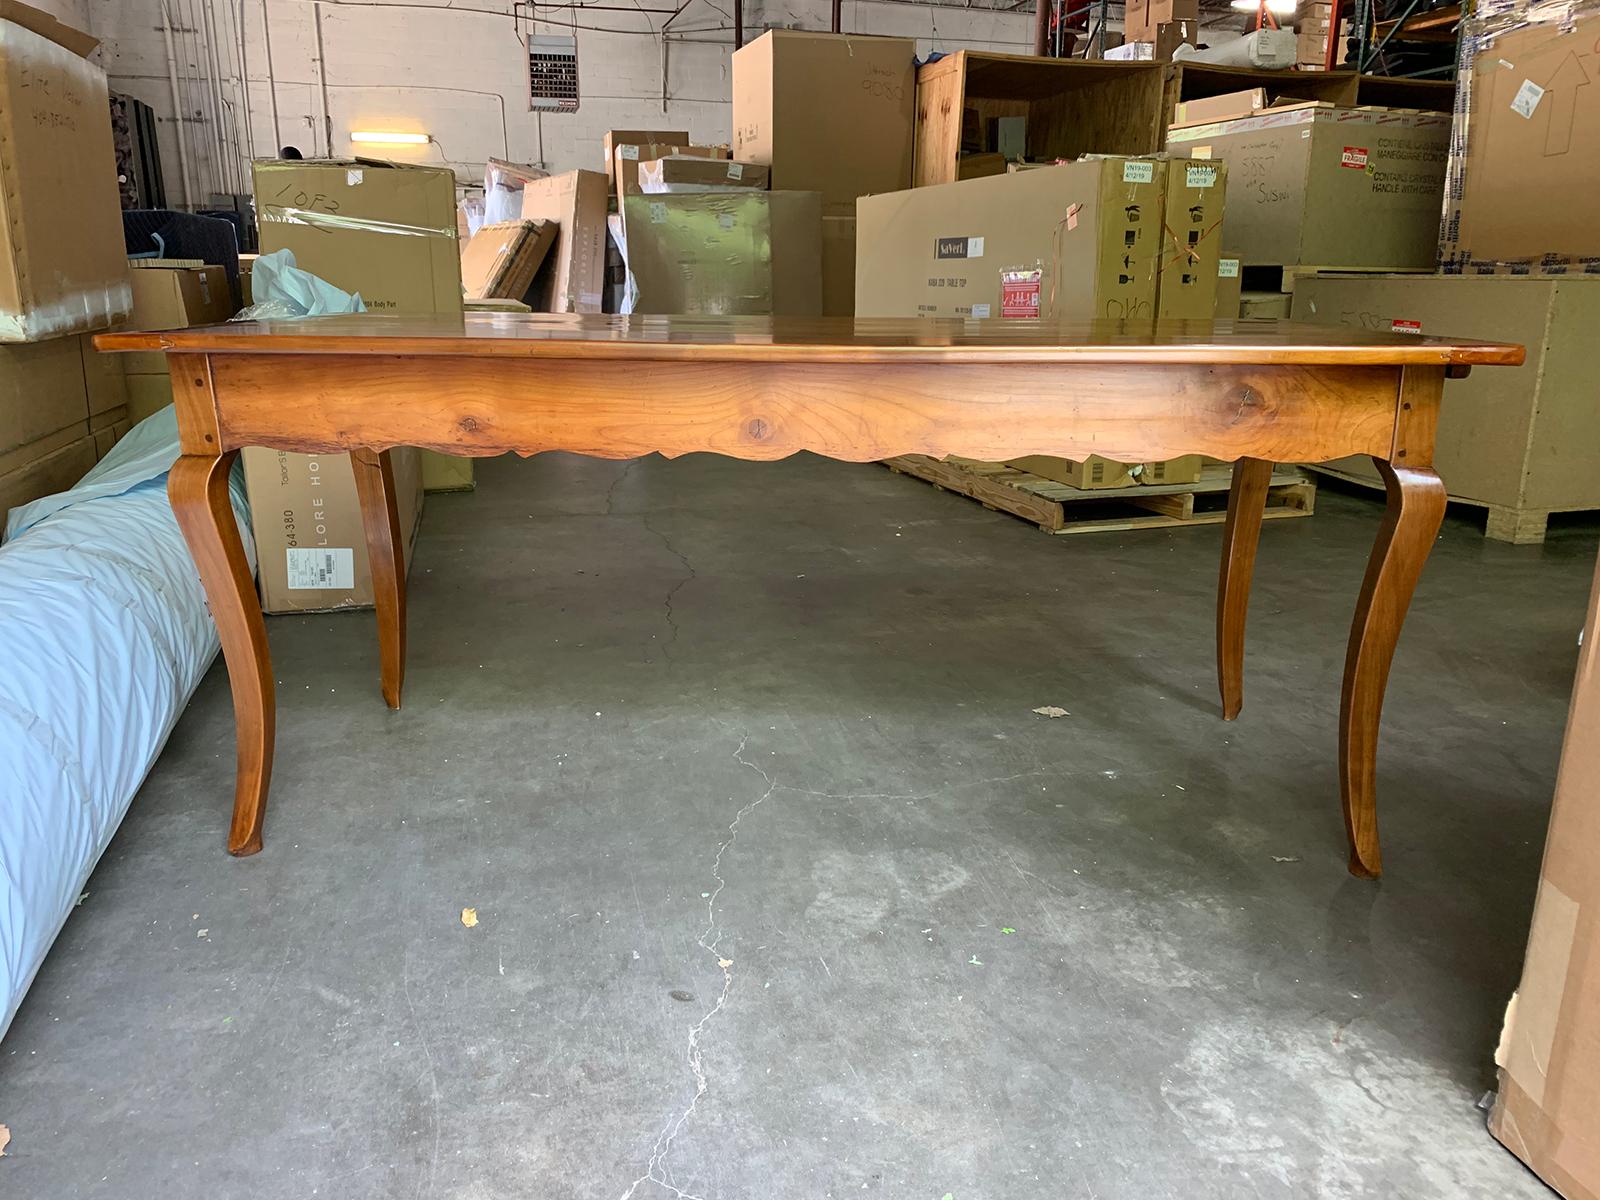 19th century French fruitwood farm dining table with 1 drawer, 1 slide
Measures: 71.25